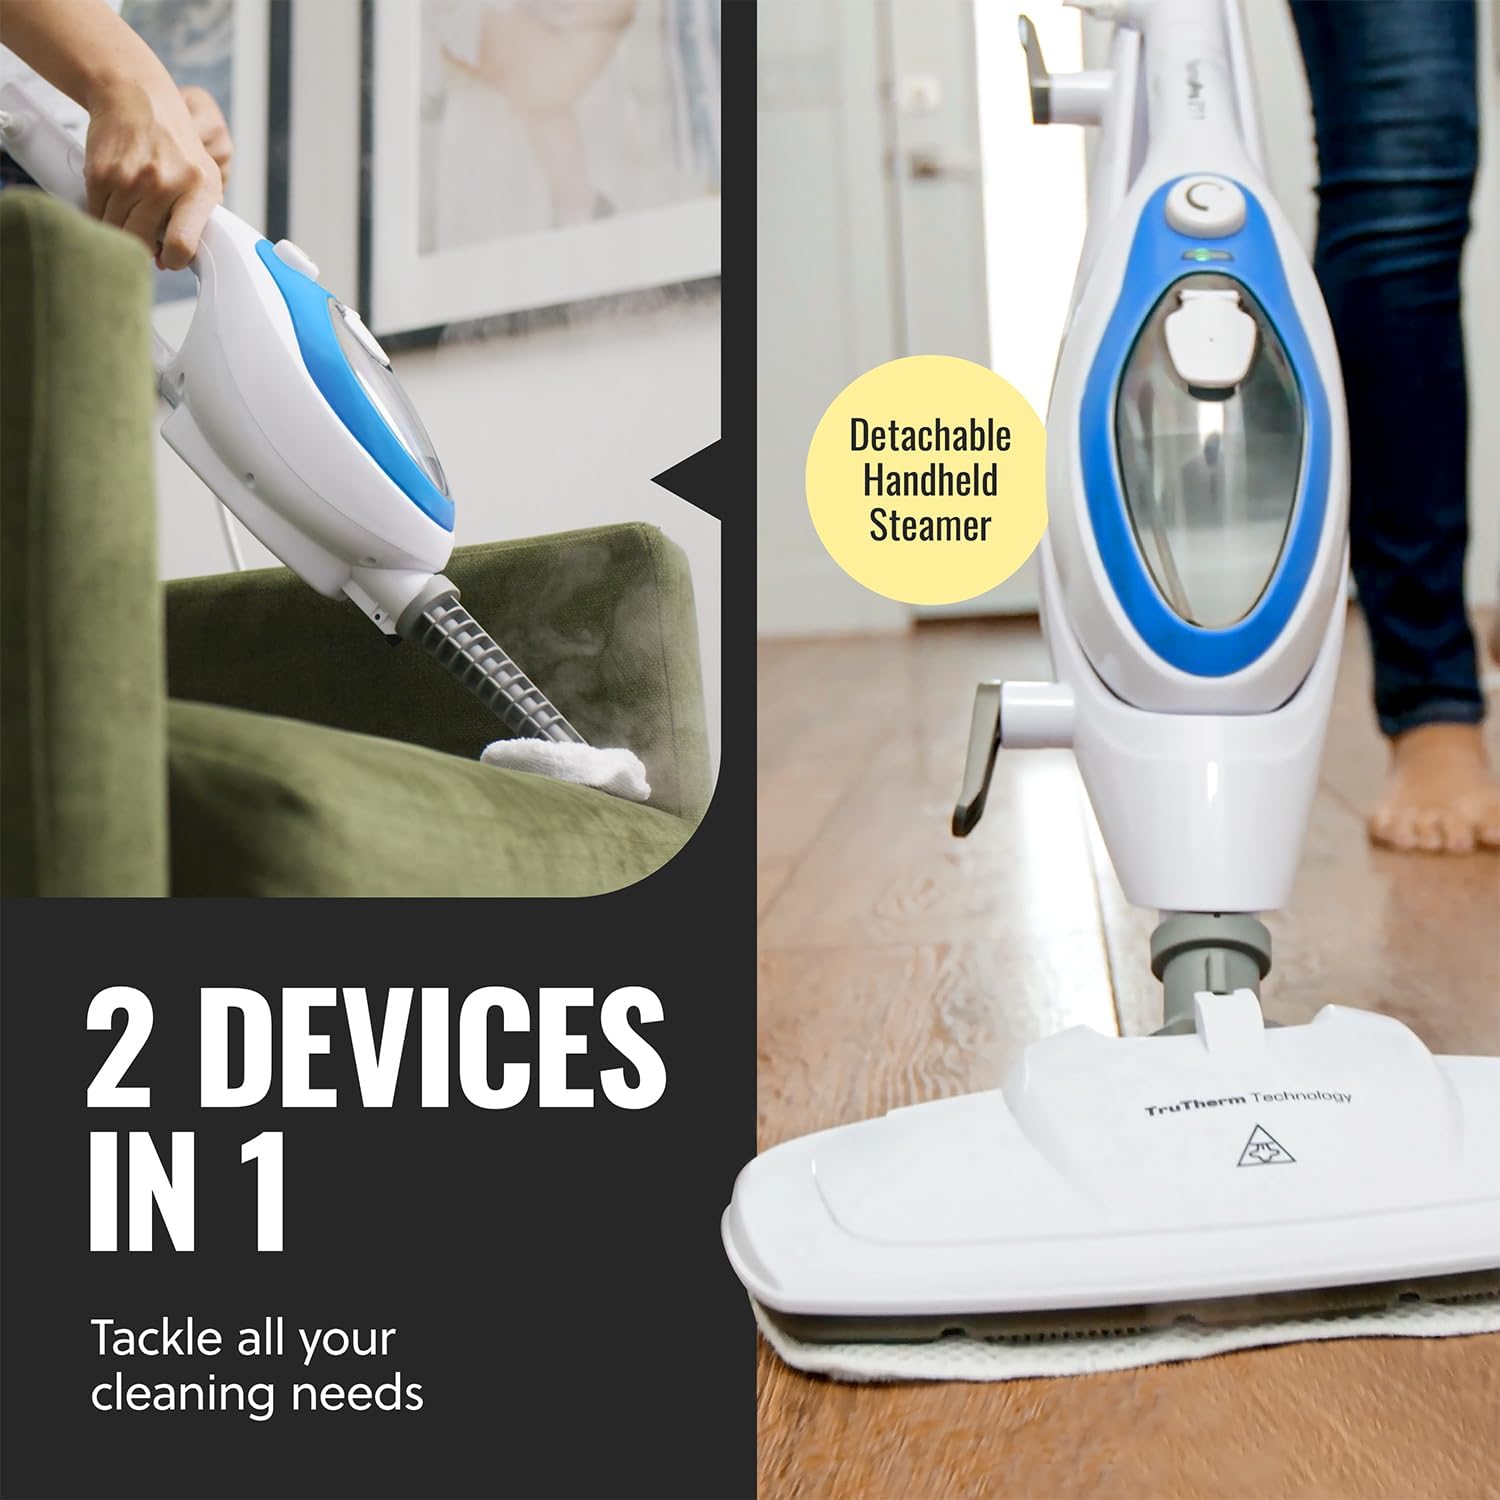 Buy H2O HD 5-in-1 Steam Mop and Handheld Steam Cleaner, Steam cleaners